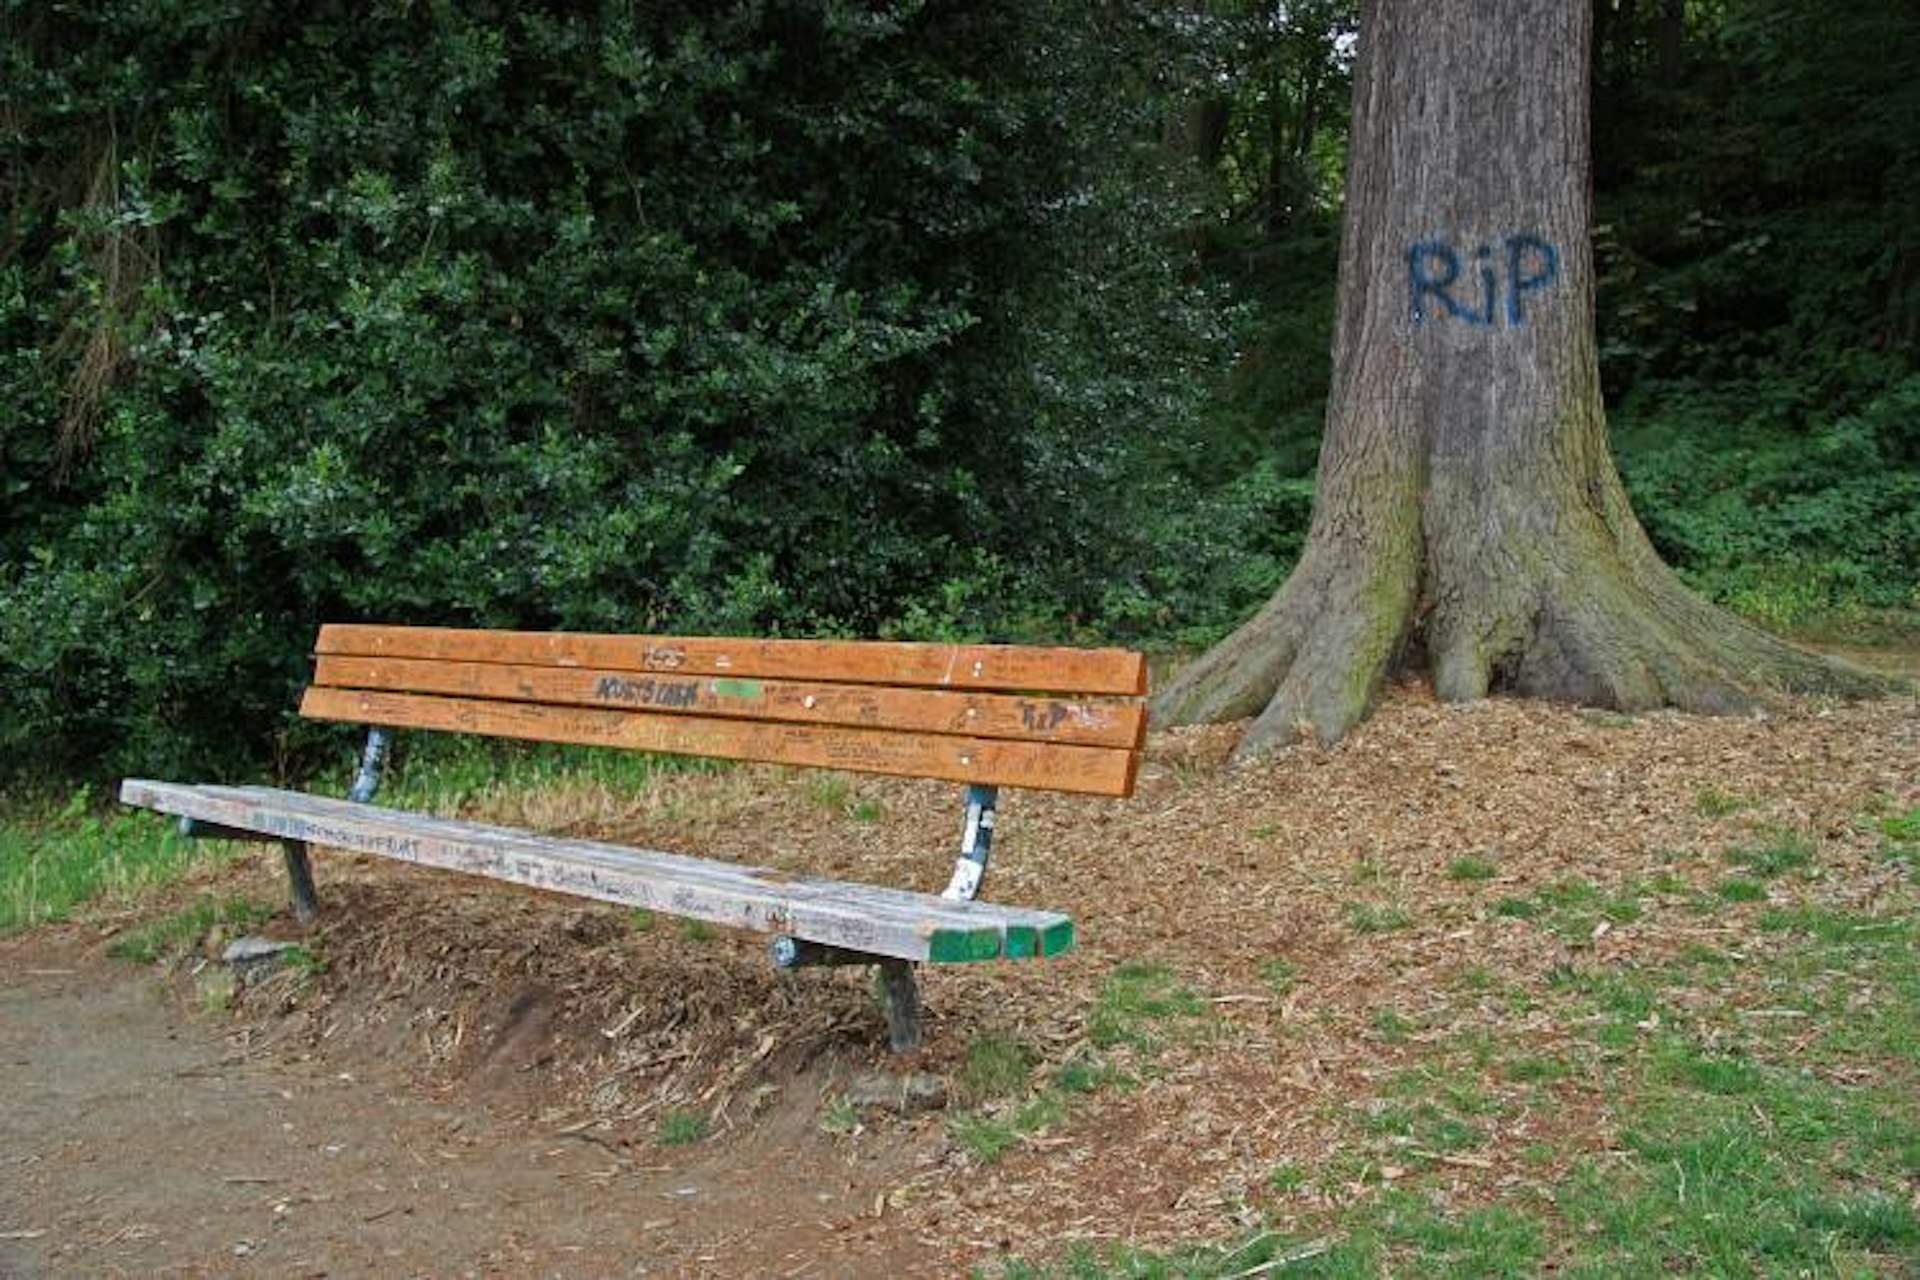 Tributes in marker pen on a bench in Viretta Park. Image by Sean O'Neill / CC BY-NC-ND 2.0